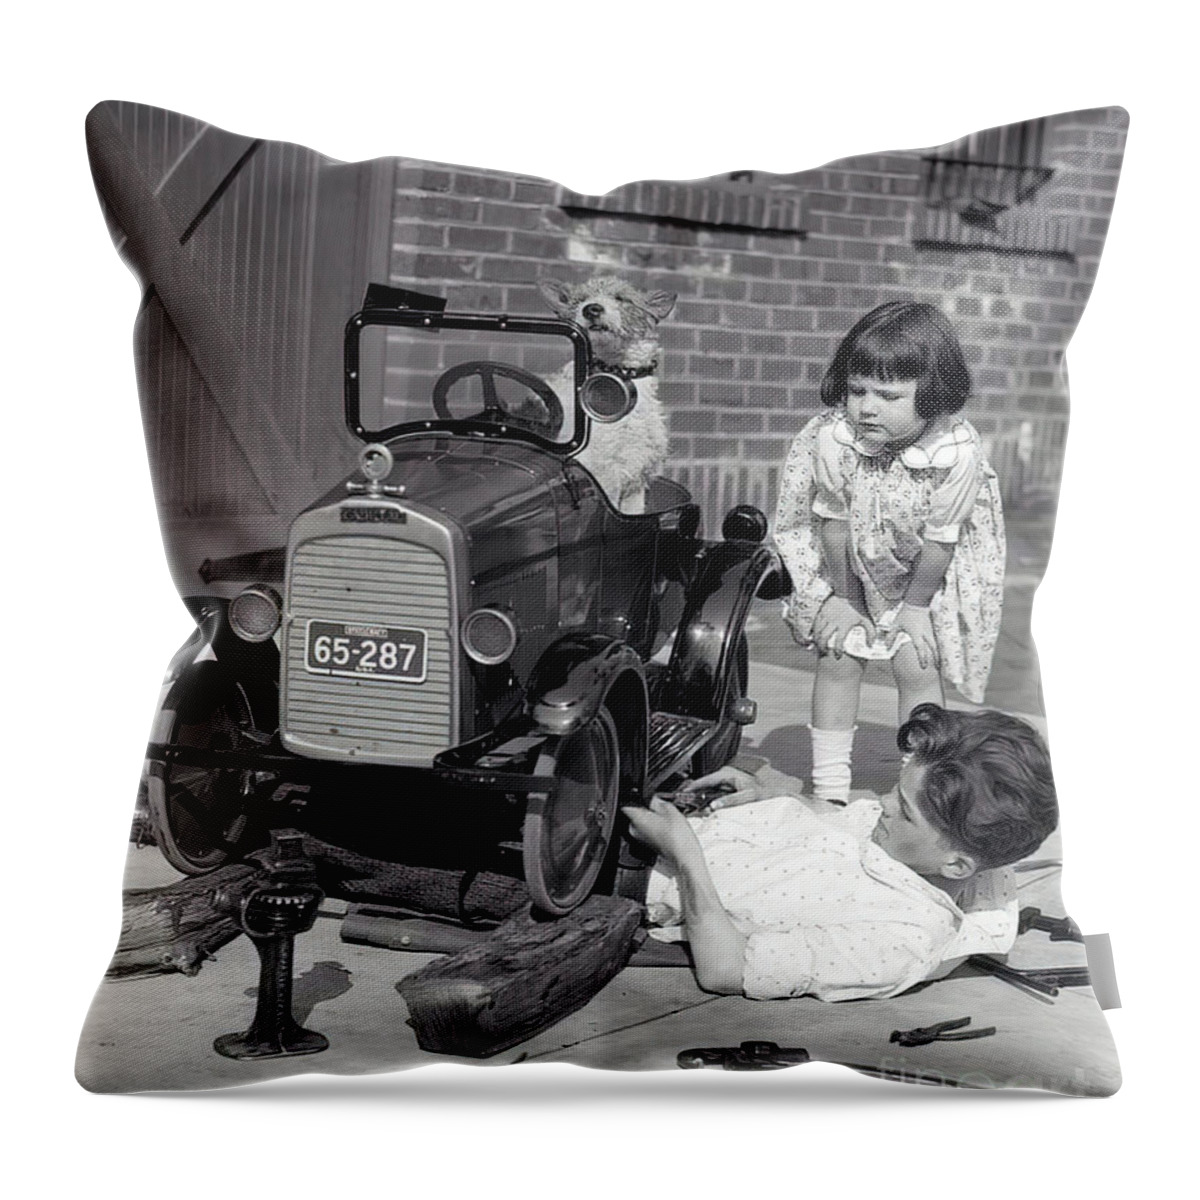 Vintage Throw Pillow featuring the photograph Children And Dog Repairing 1920s Pedal Car by Retrographs